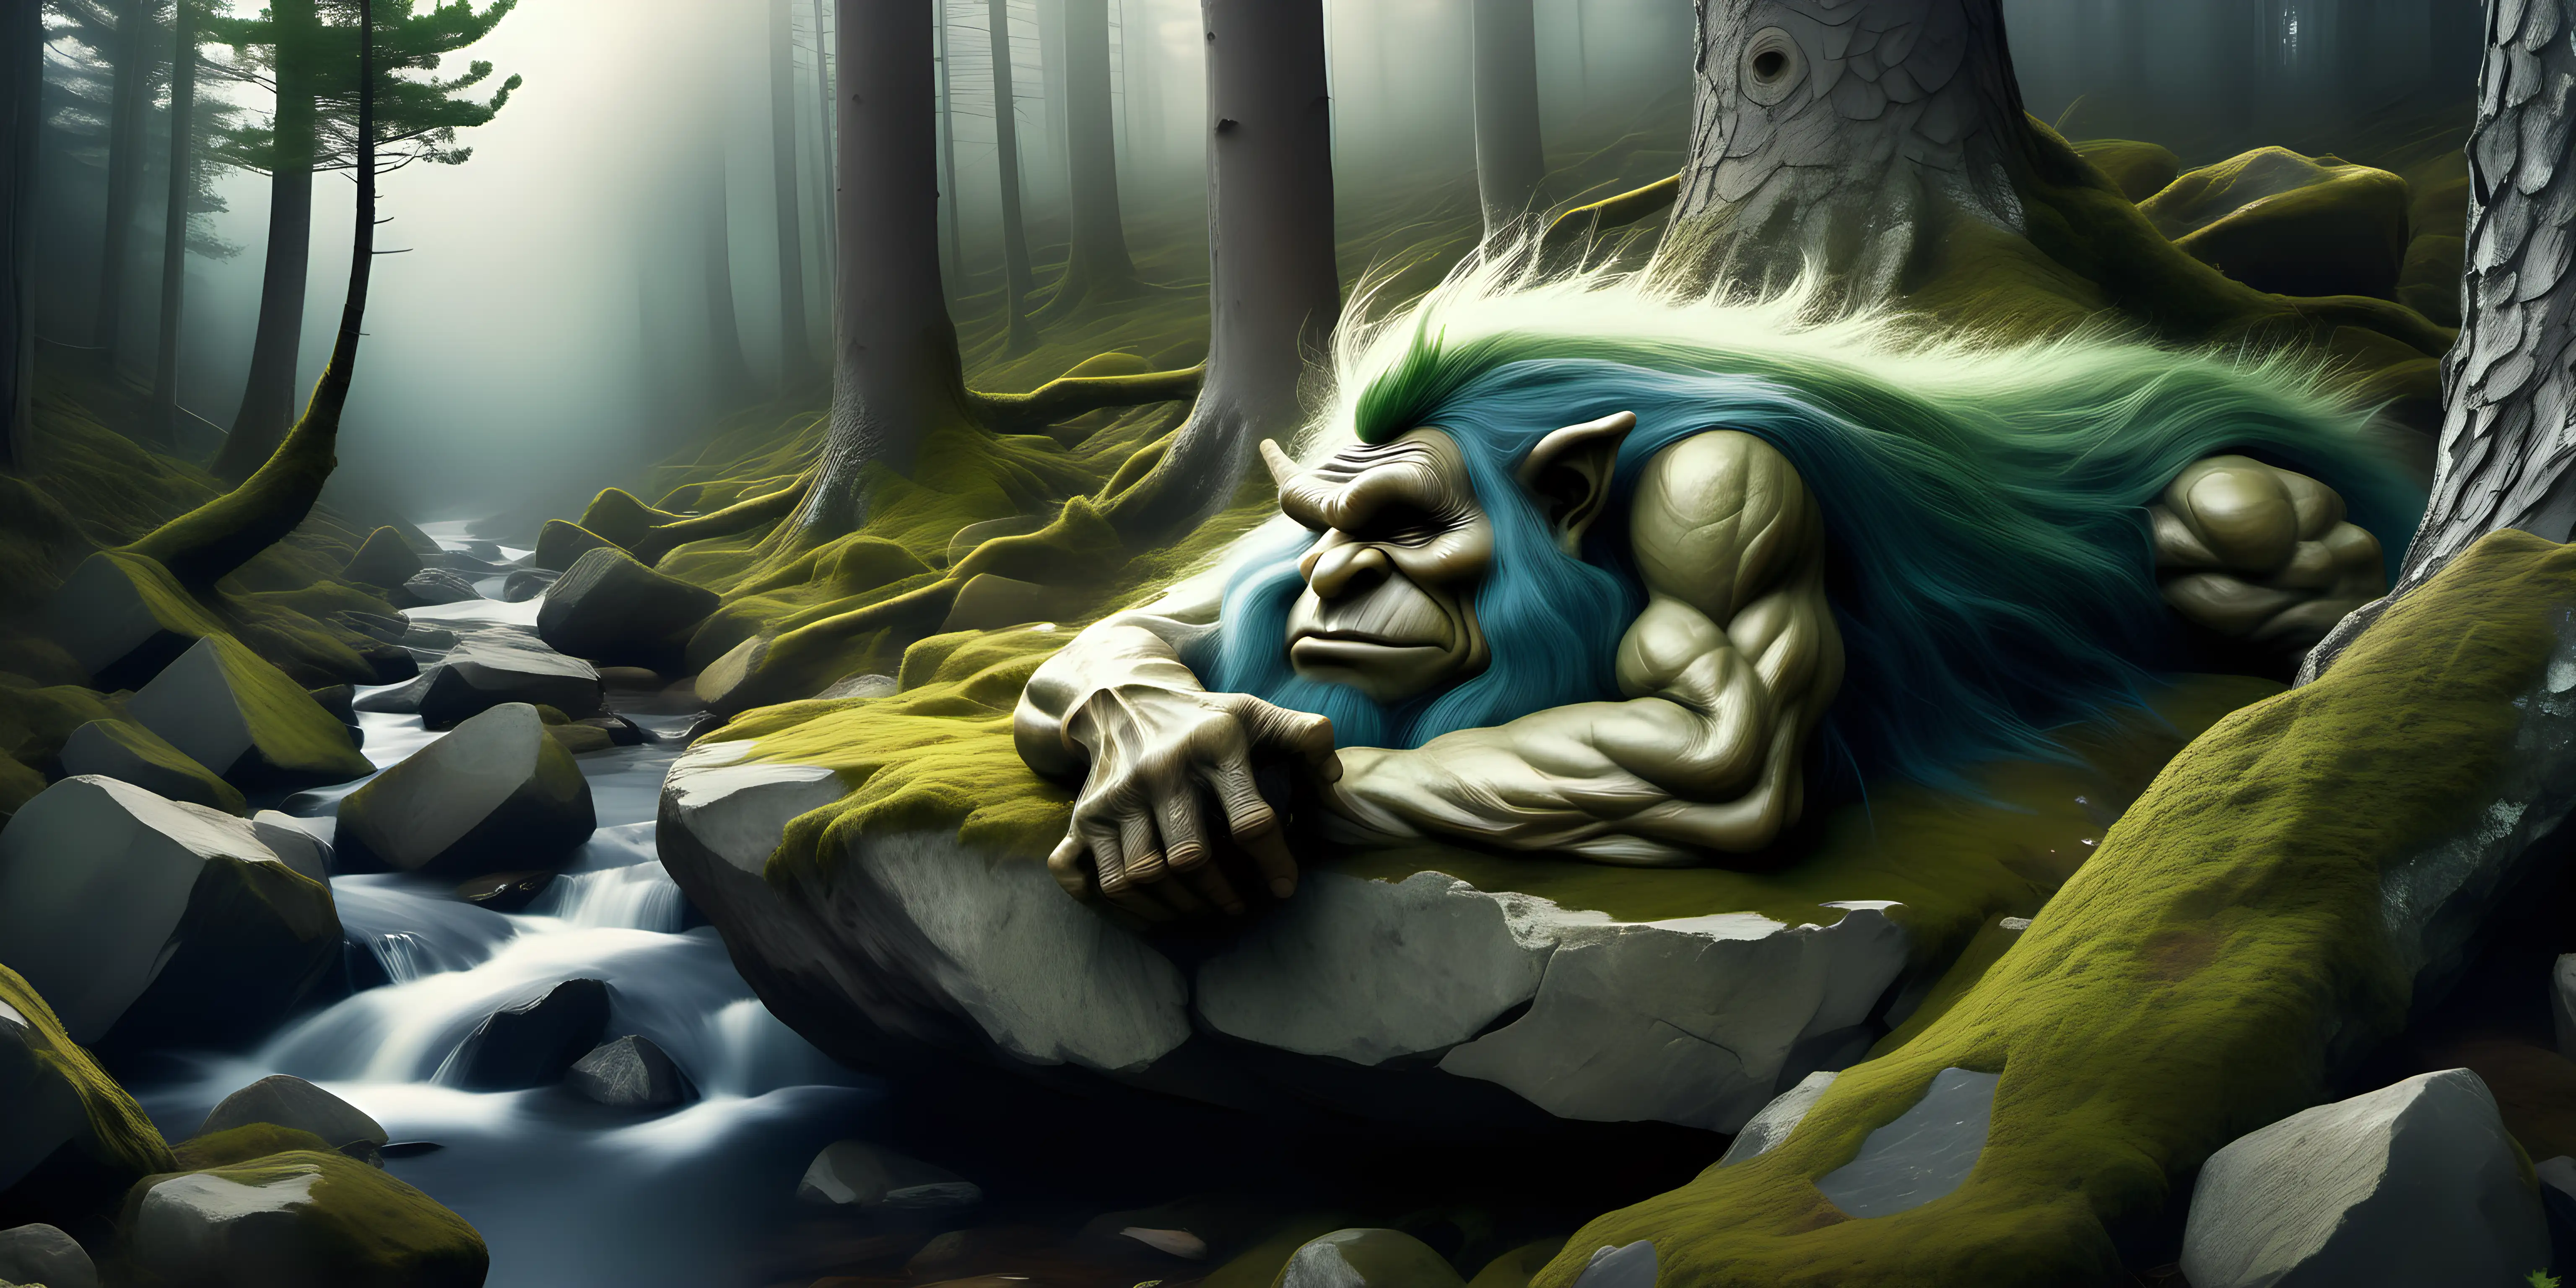 Peaceful Slumber of a Norwegian Folklore Troll in Ancient Green Pine Forest